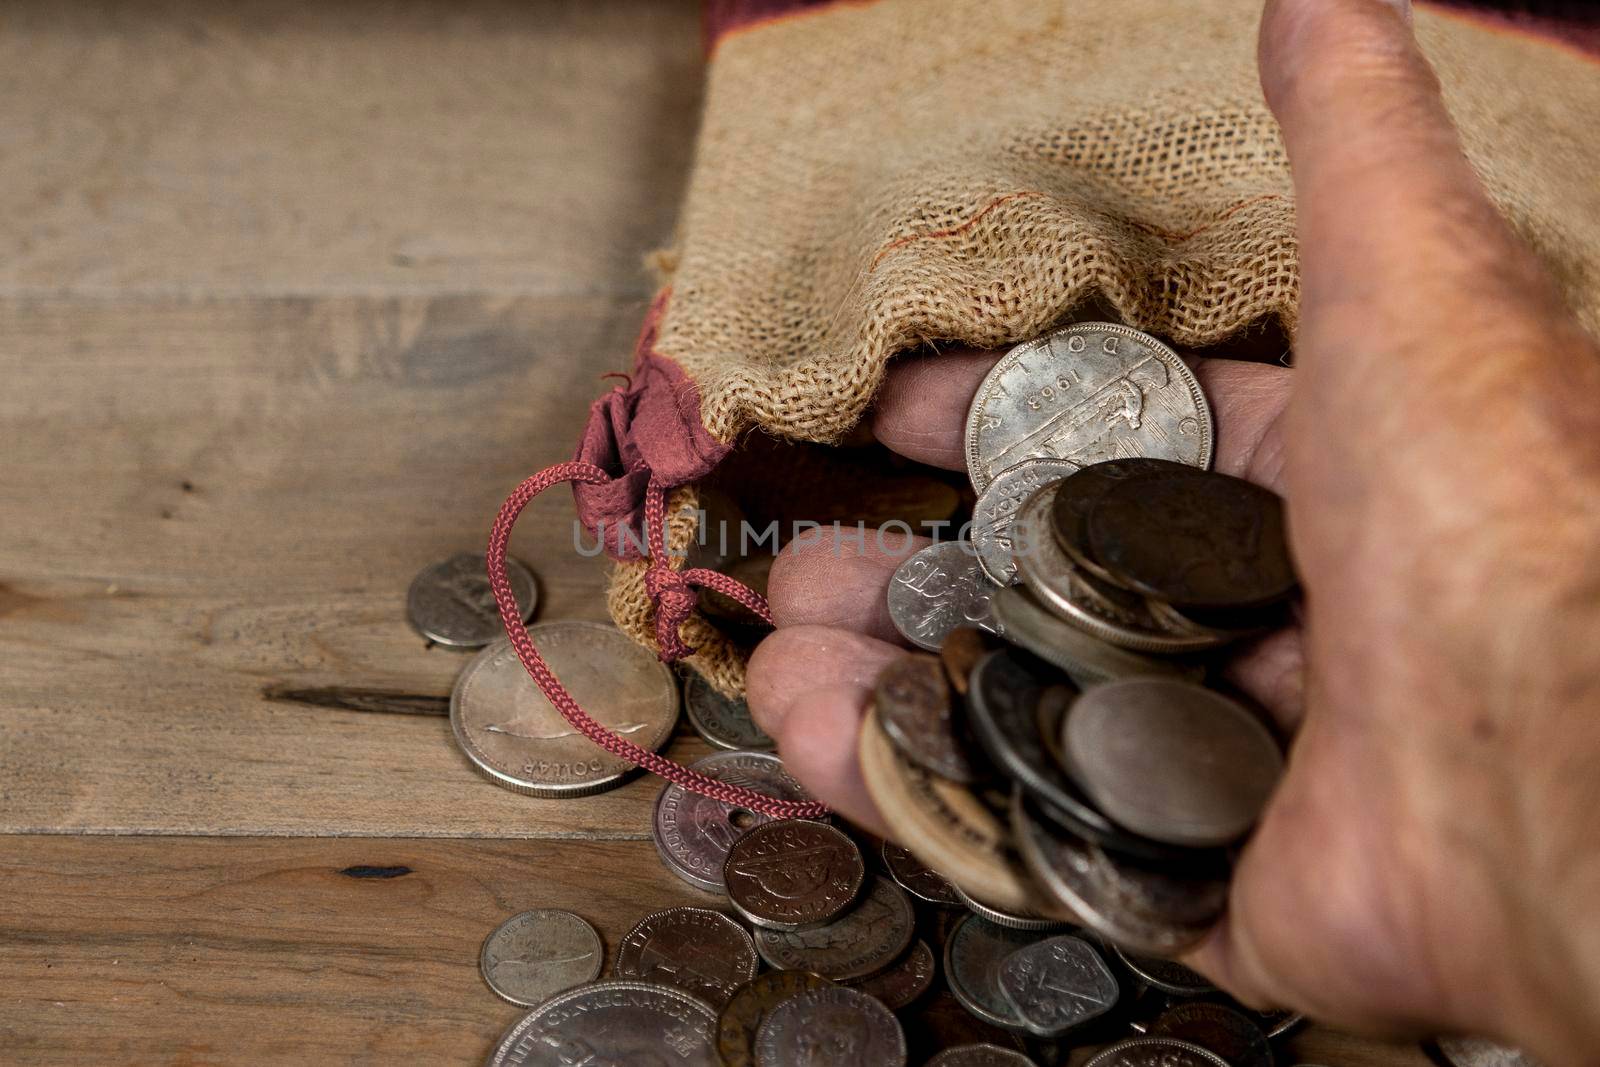 Coins taken from a small bag lie in the palm of your hand